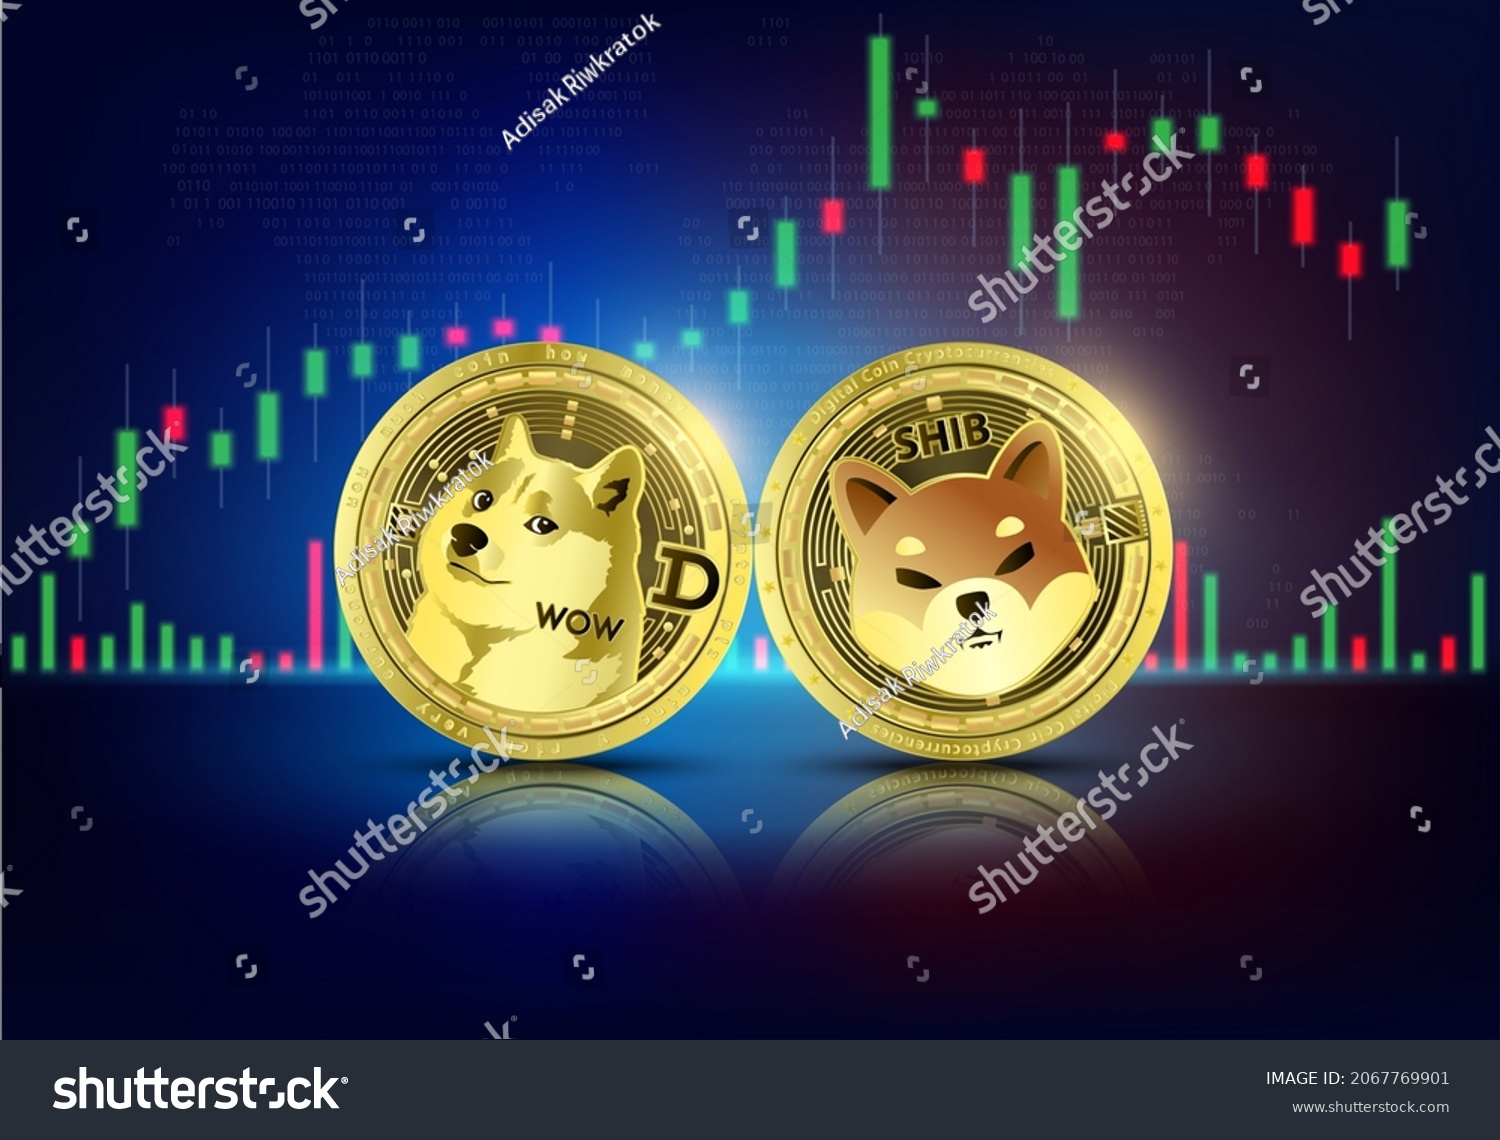 SVG of Gold coin Dogecoin (DOGE) and Shiba inu (SHIB) on world map. Cryptocurrency. Stock market growth competition Big data information mining technology. Internet electronic payment futuristic. 3D vector. svg